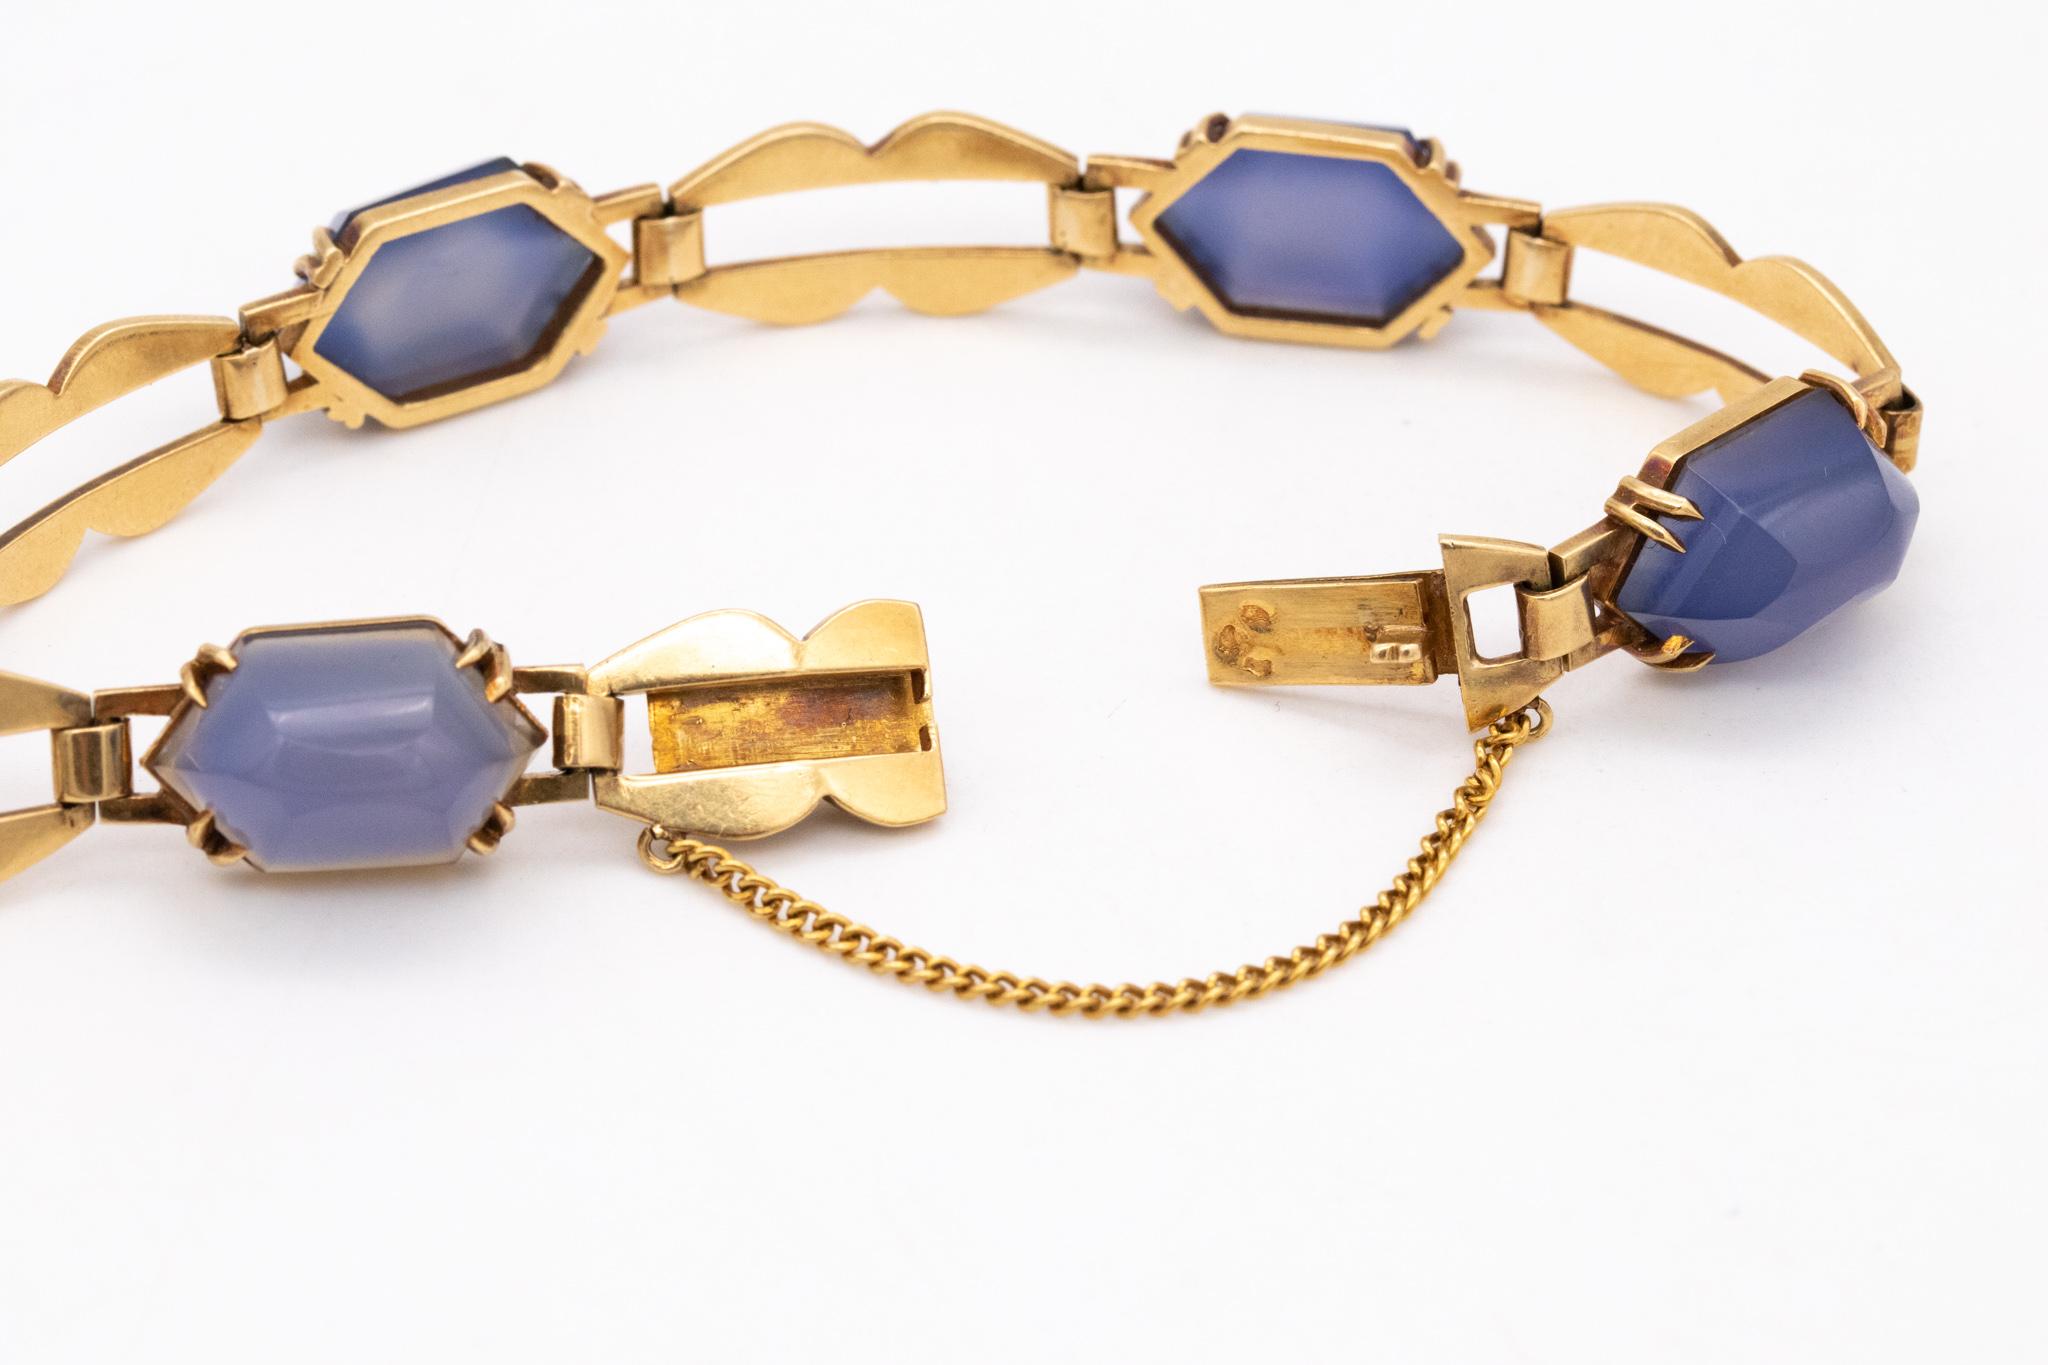 French 1930 Art Deco Bracelet In 18Kt Yellow Gold With 35 Cts Of Blue Chalcedony For Sale 1